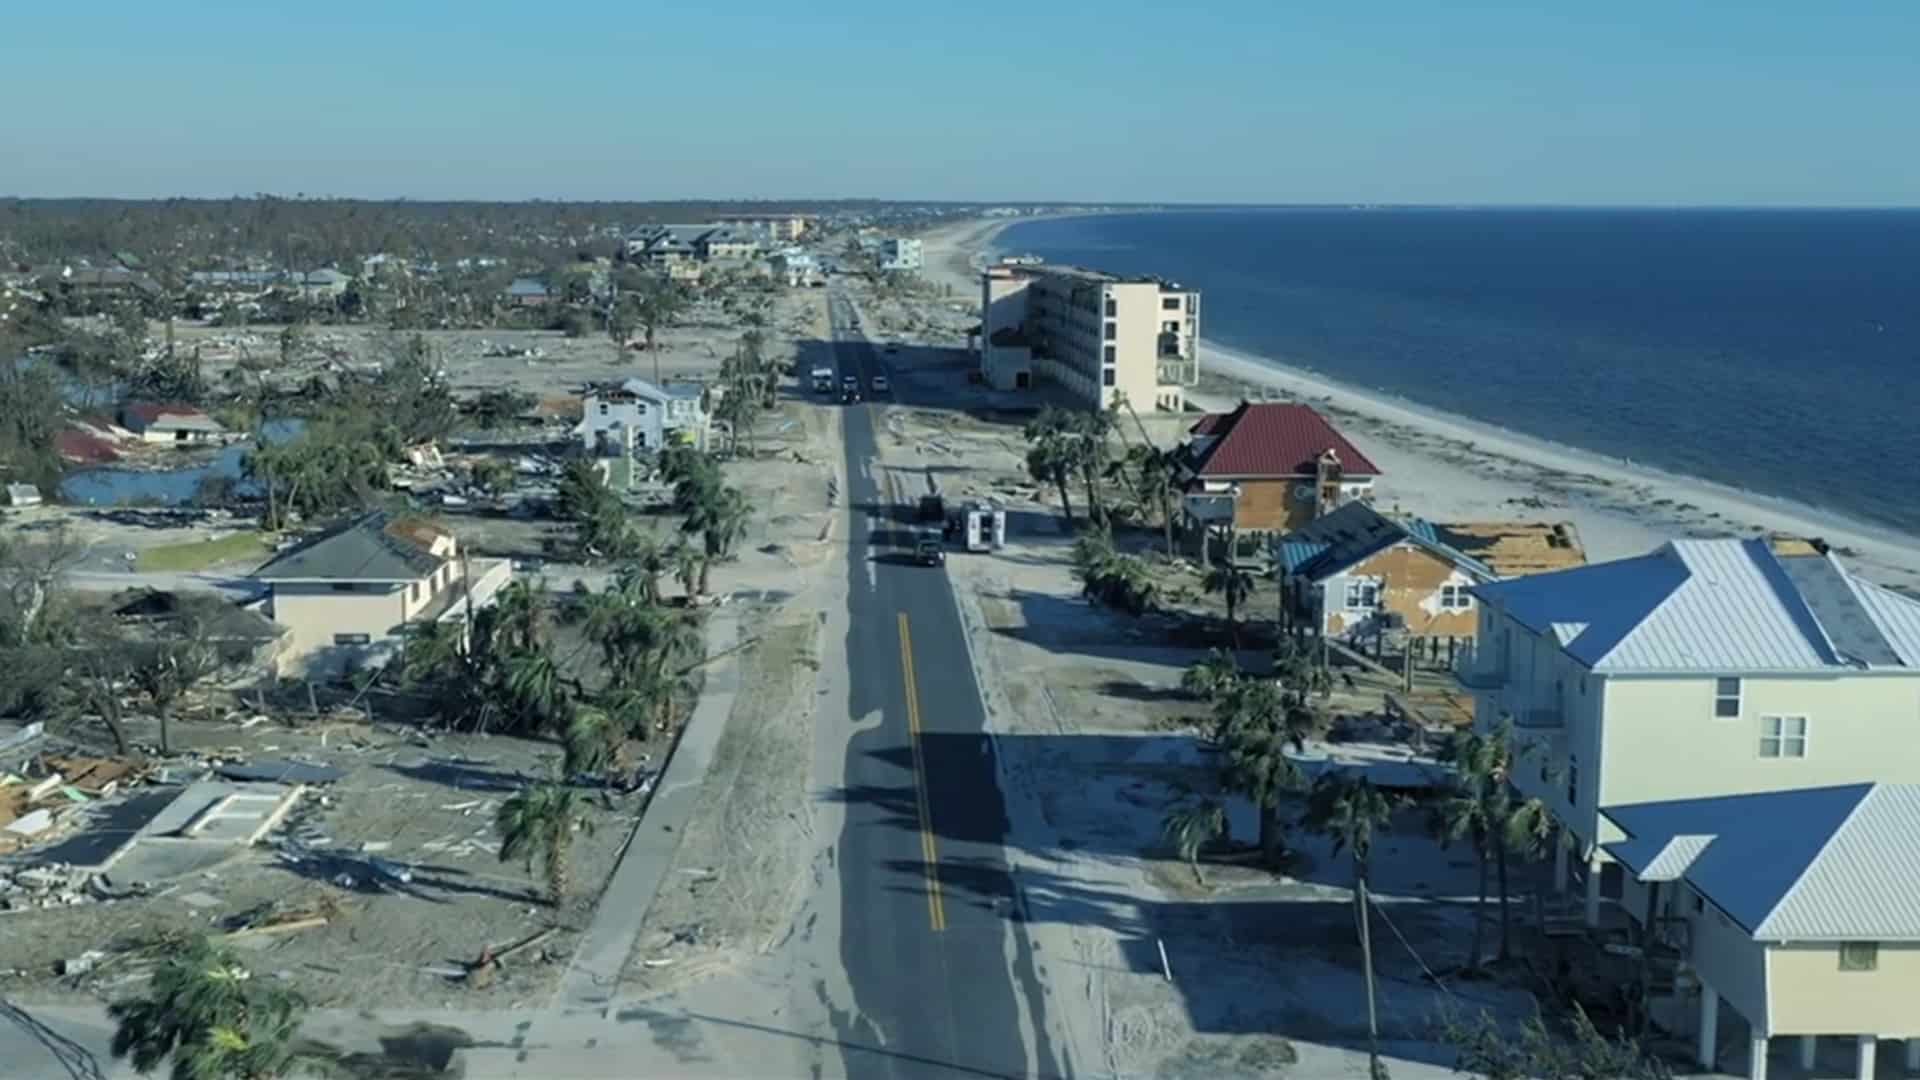 Hurricane Michael Destruction. Please help with the relief.